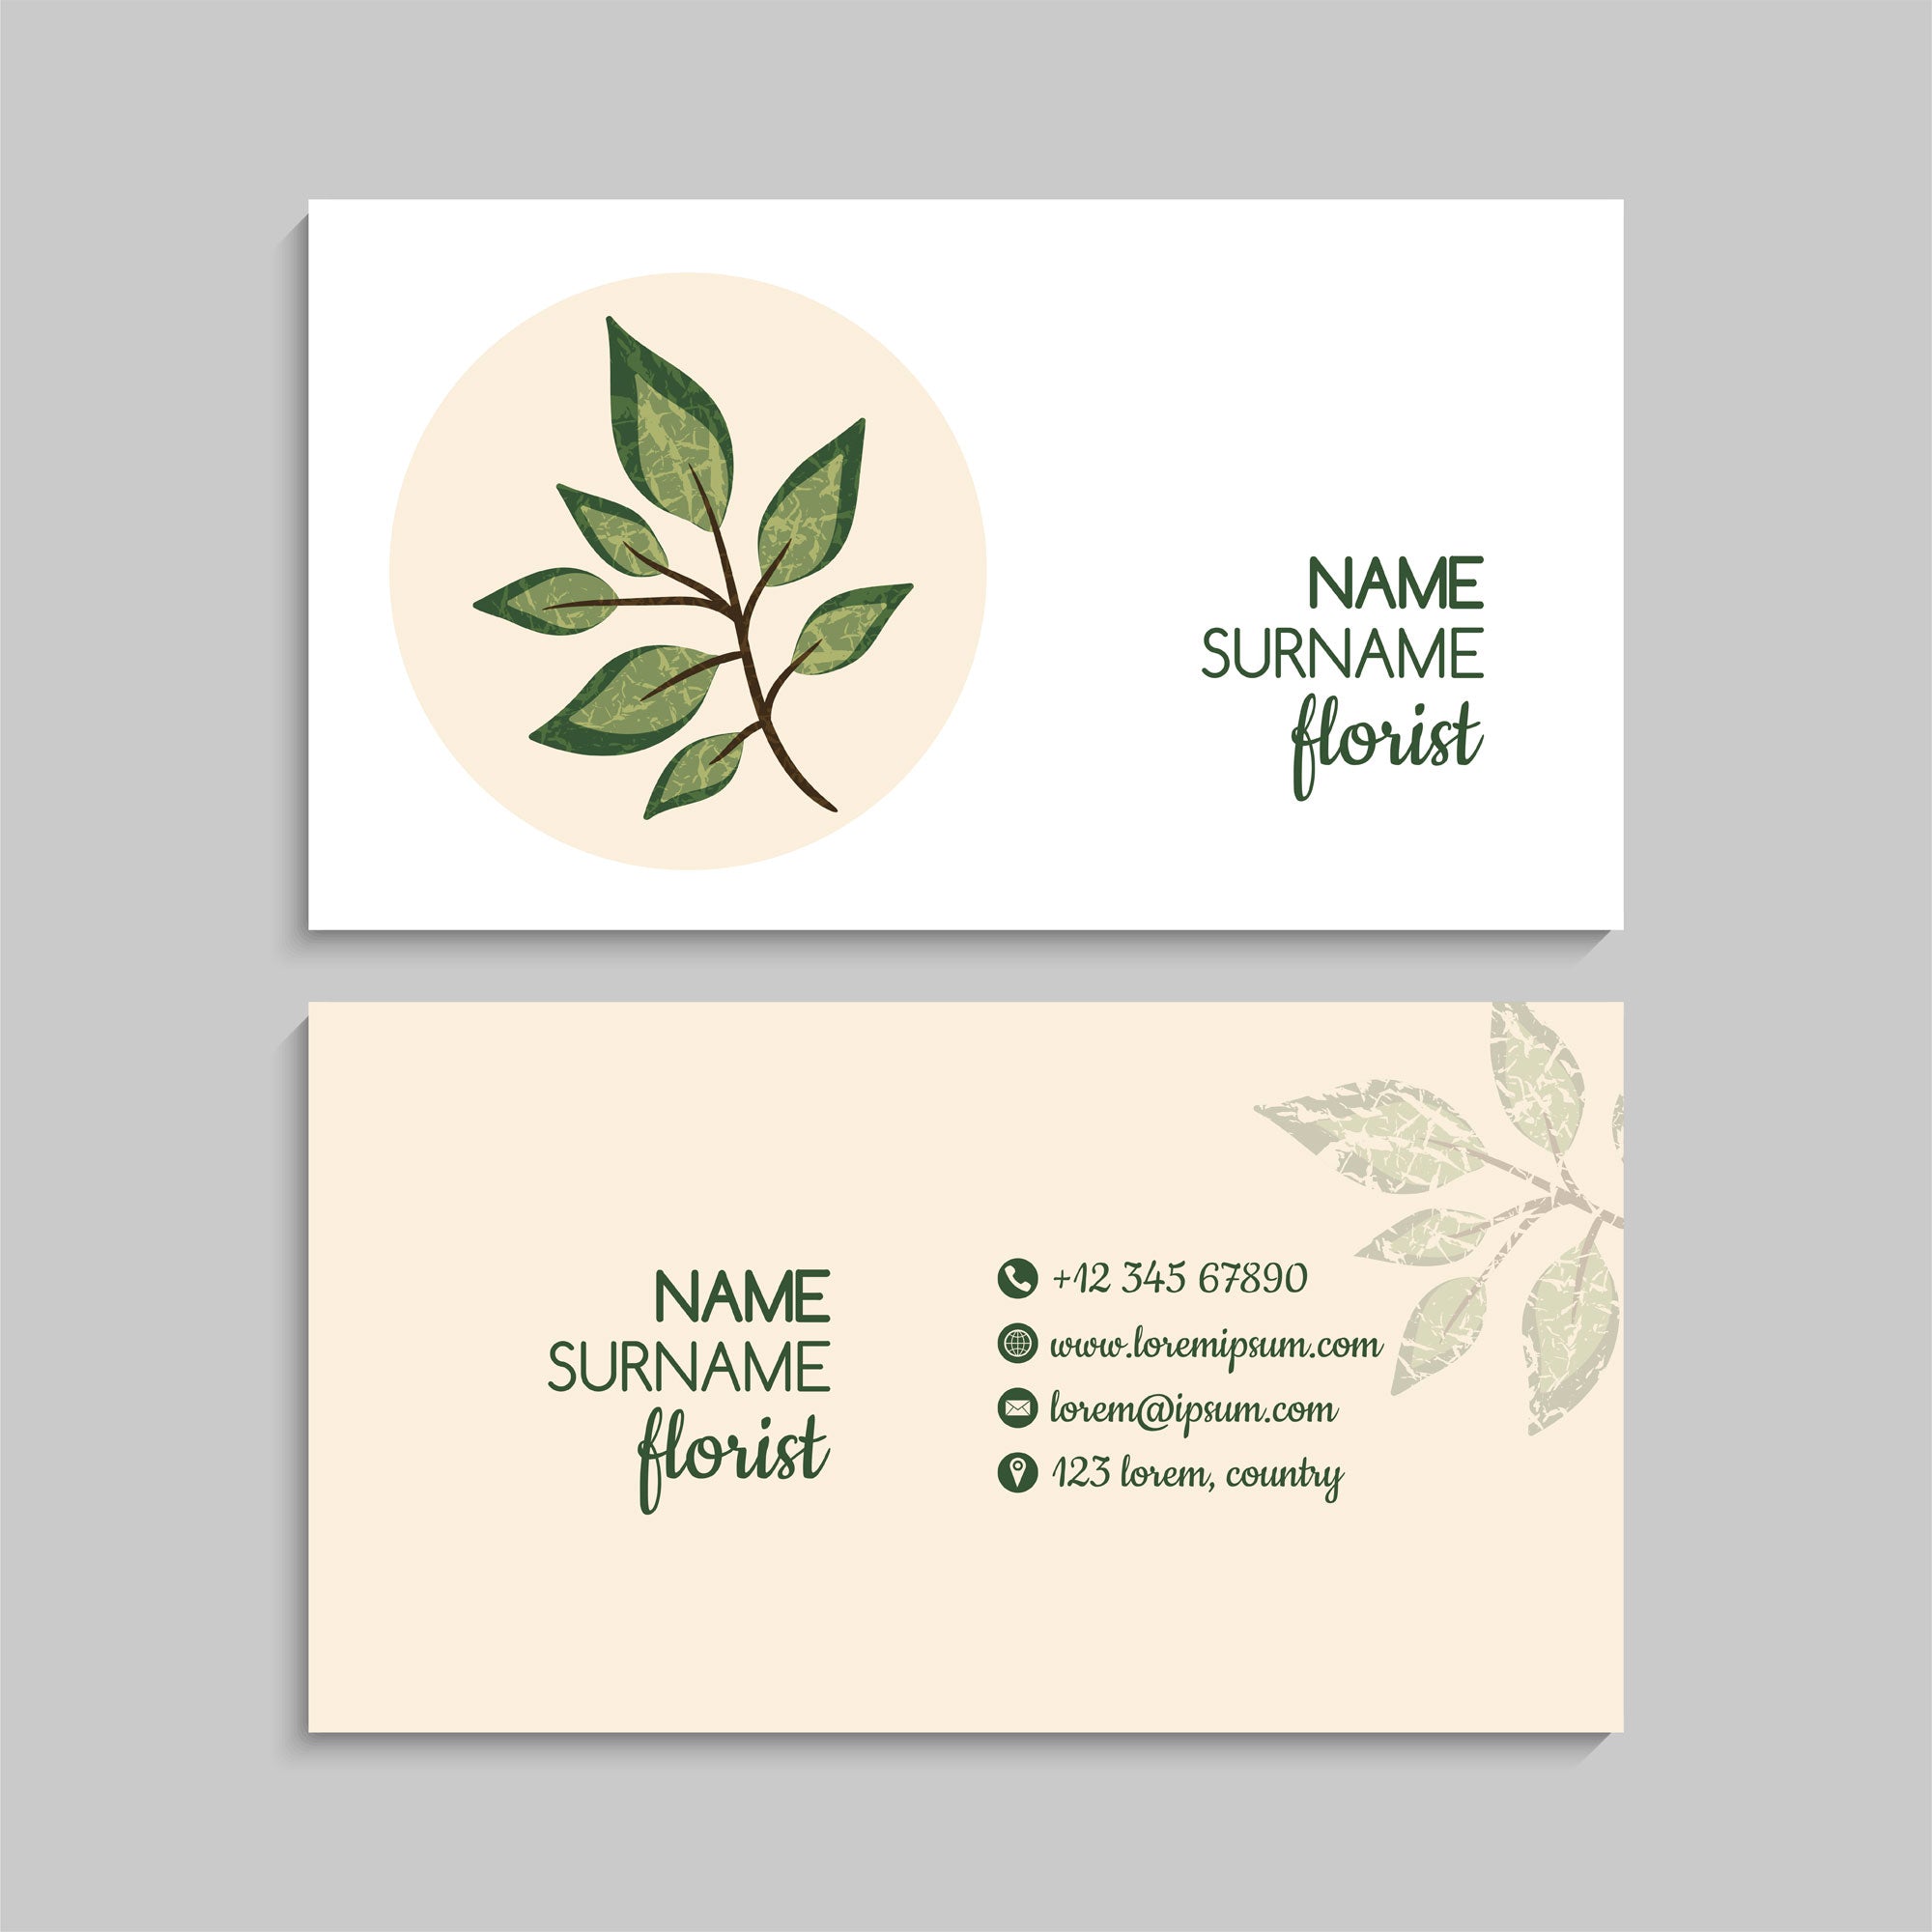 Plantable Earnest Business Cards - 250 Cards